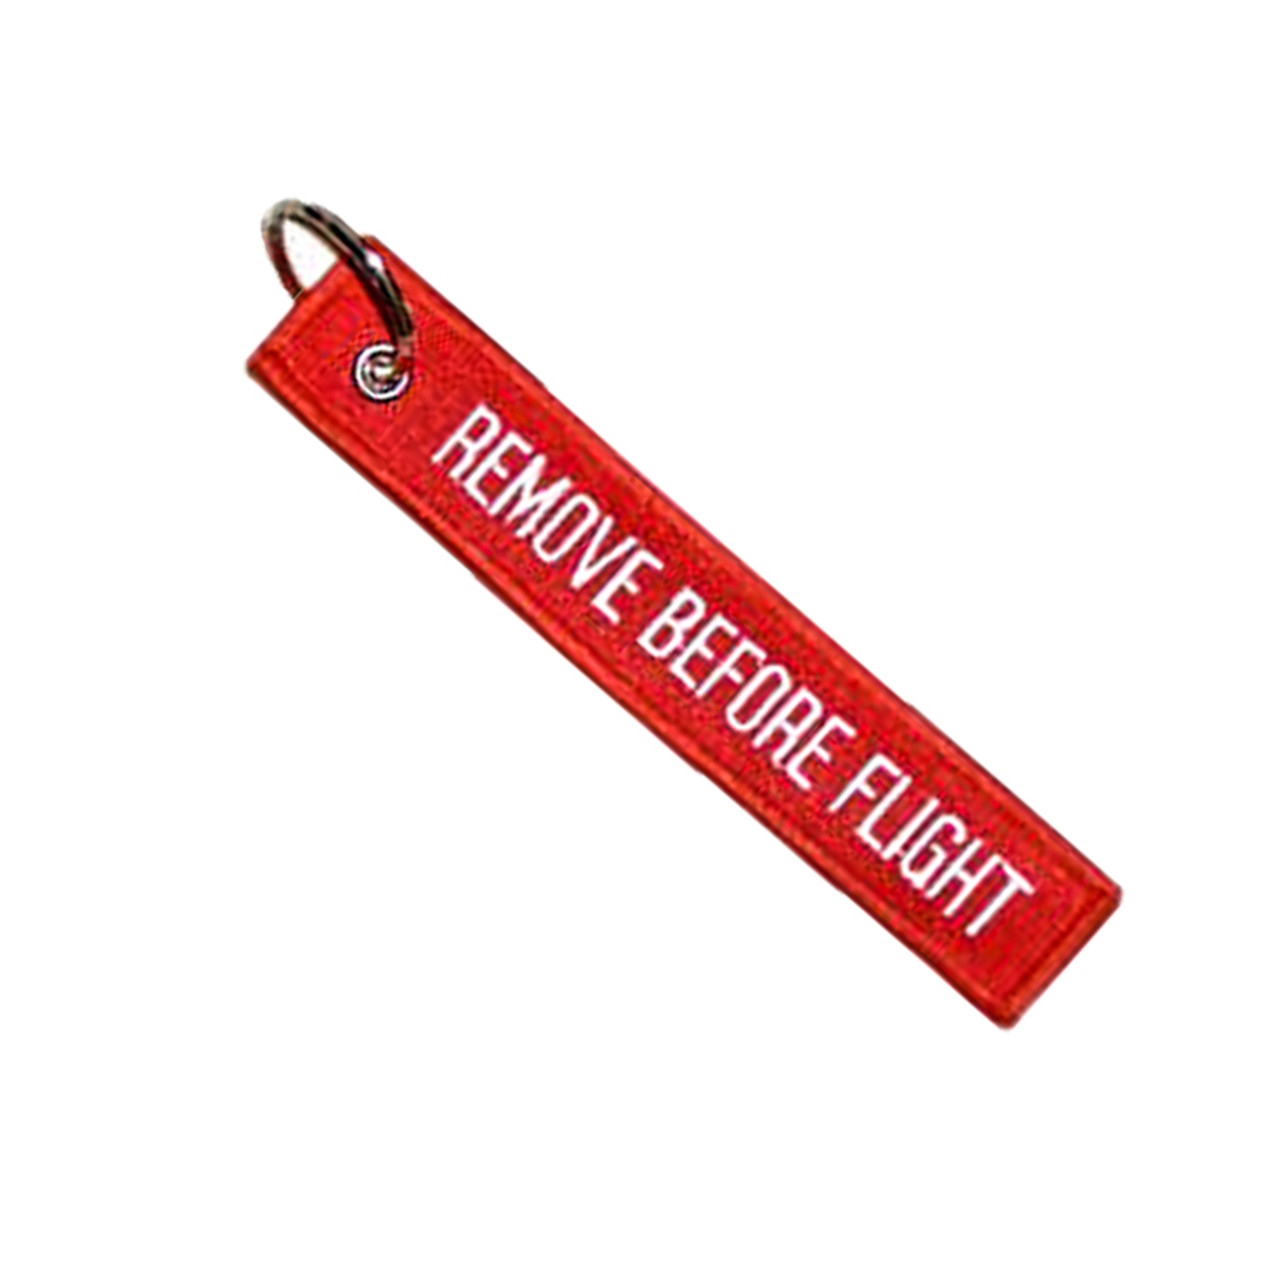 REMOVE BEFORE FLIGHT KEYCHAIN RED/white QTY= 5 TAGS FLAG PILOT CREW KEY 